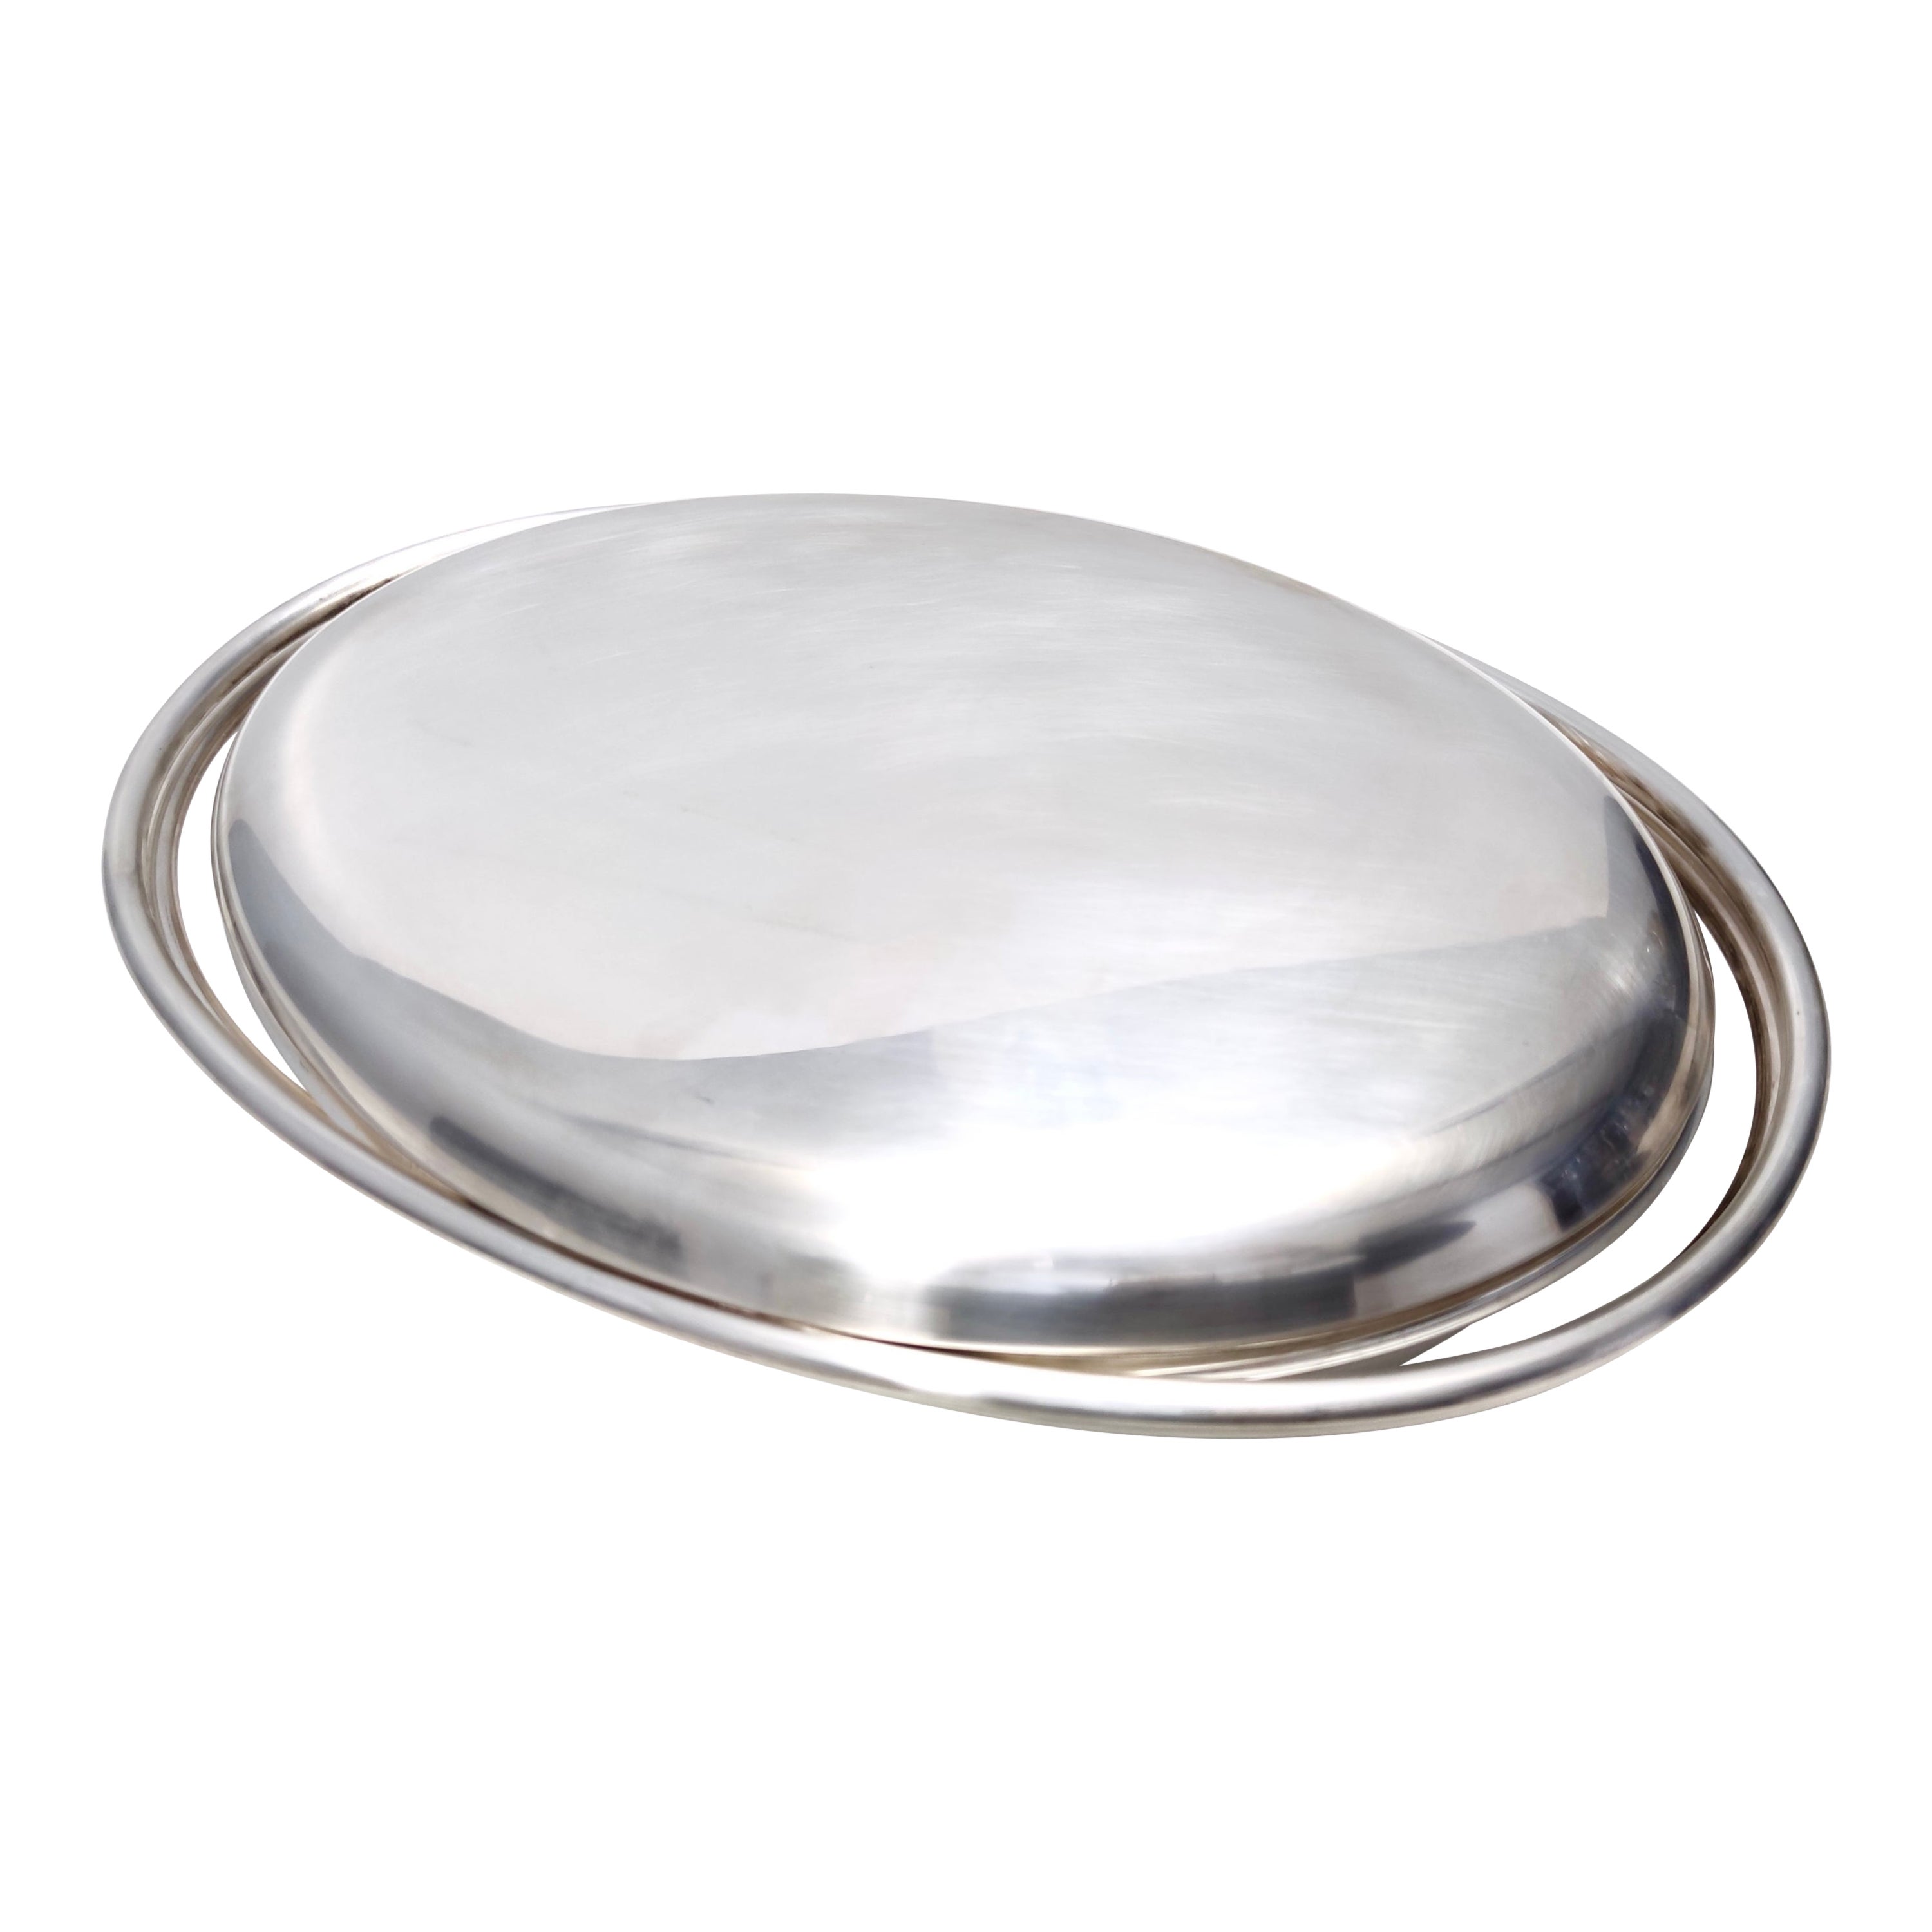 Postmodern Lino Sabattini Silver-Plated Metal Serving Plate, Marked, Italy For Sale